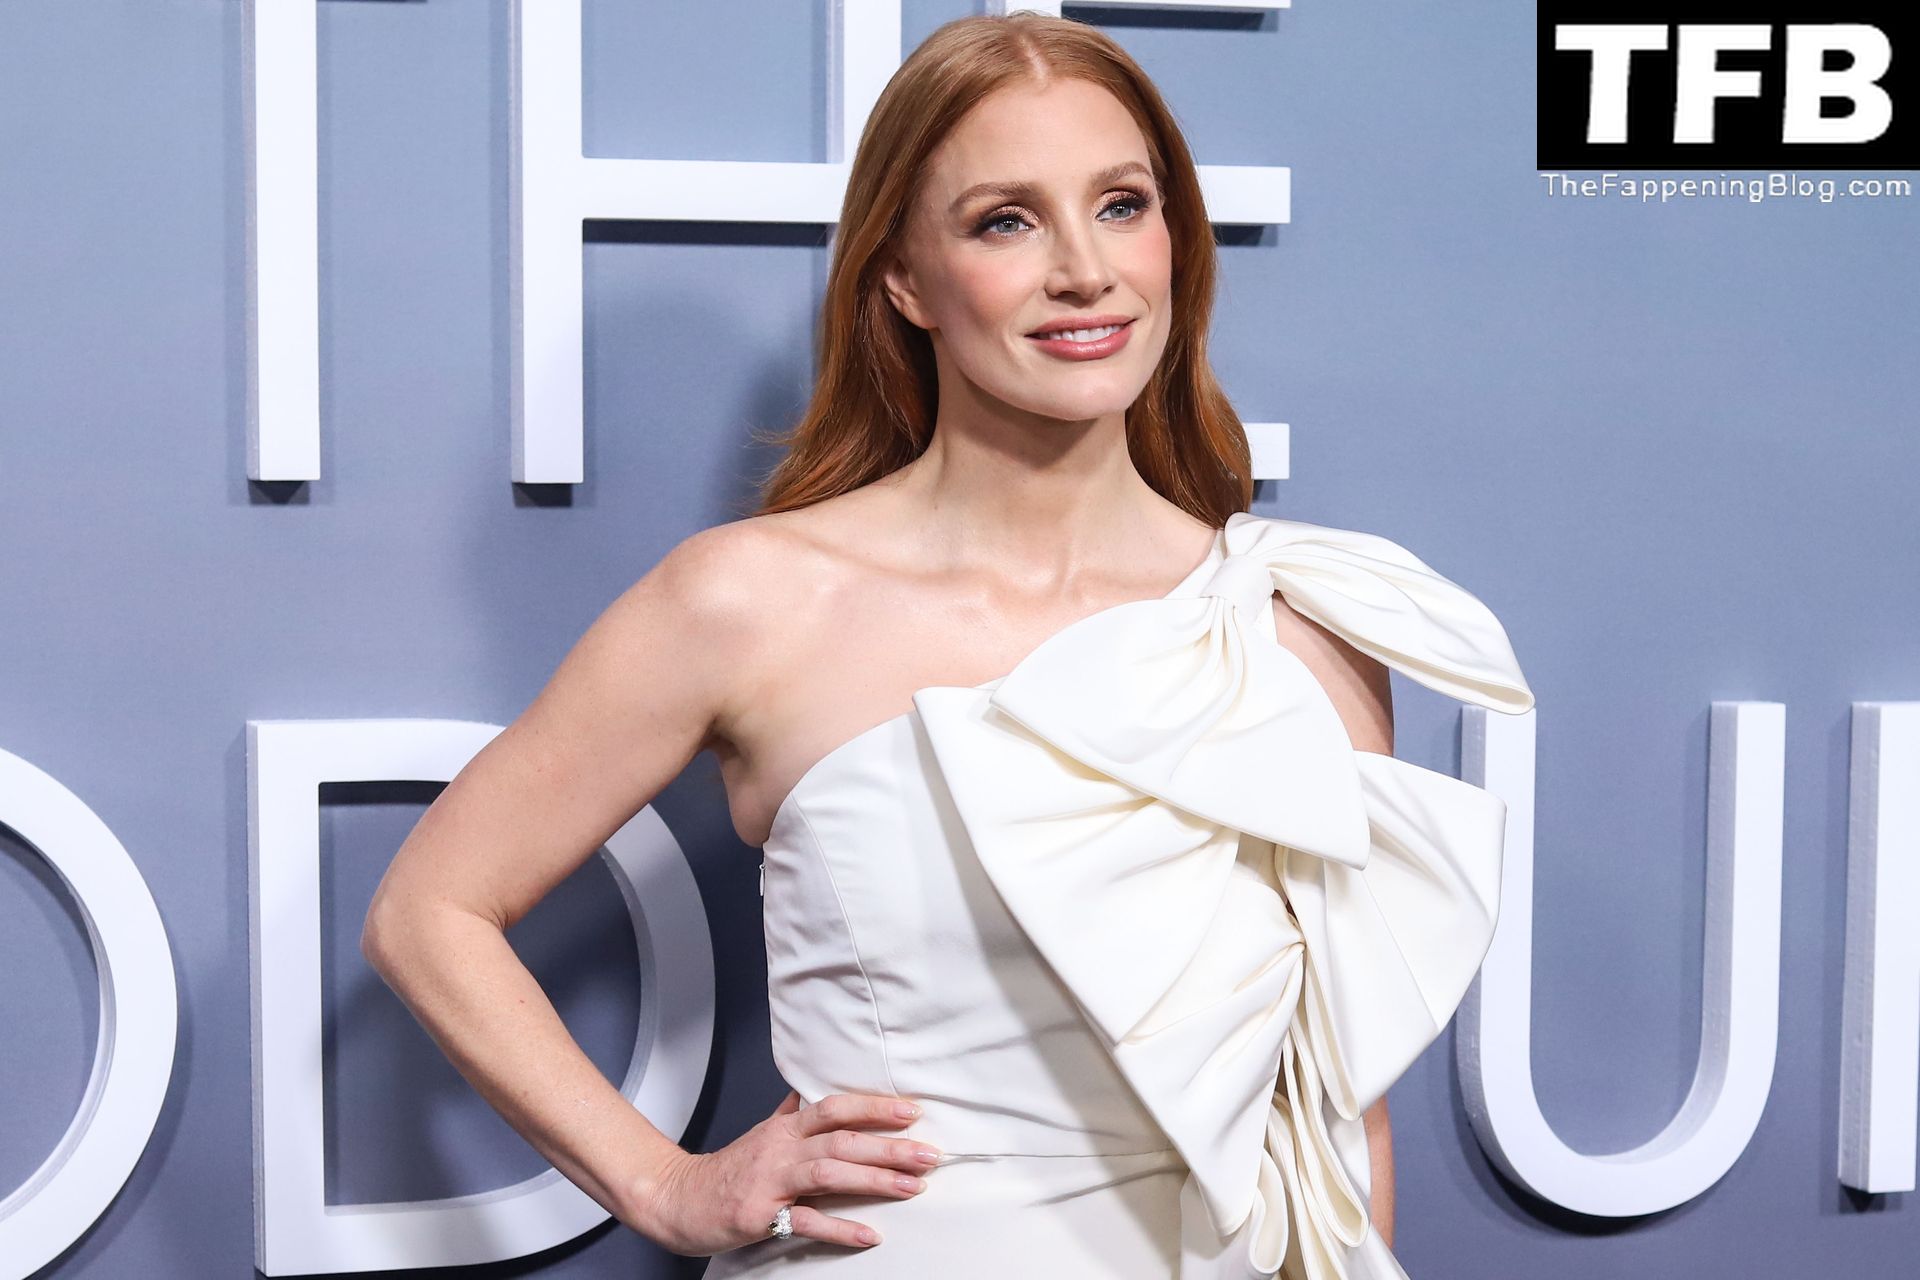 Jessica-Chastain-Sexy-The-Fappening-Blog-149-1.jpg